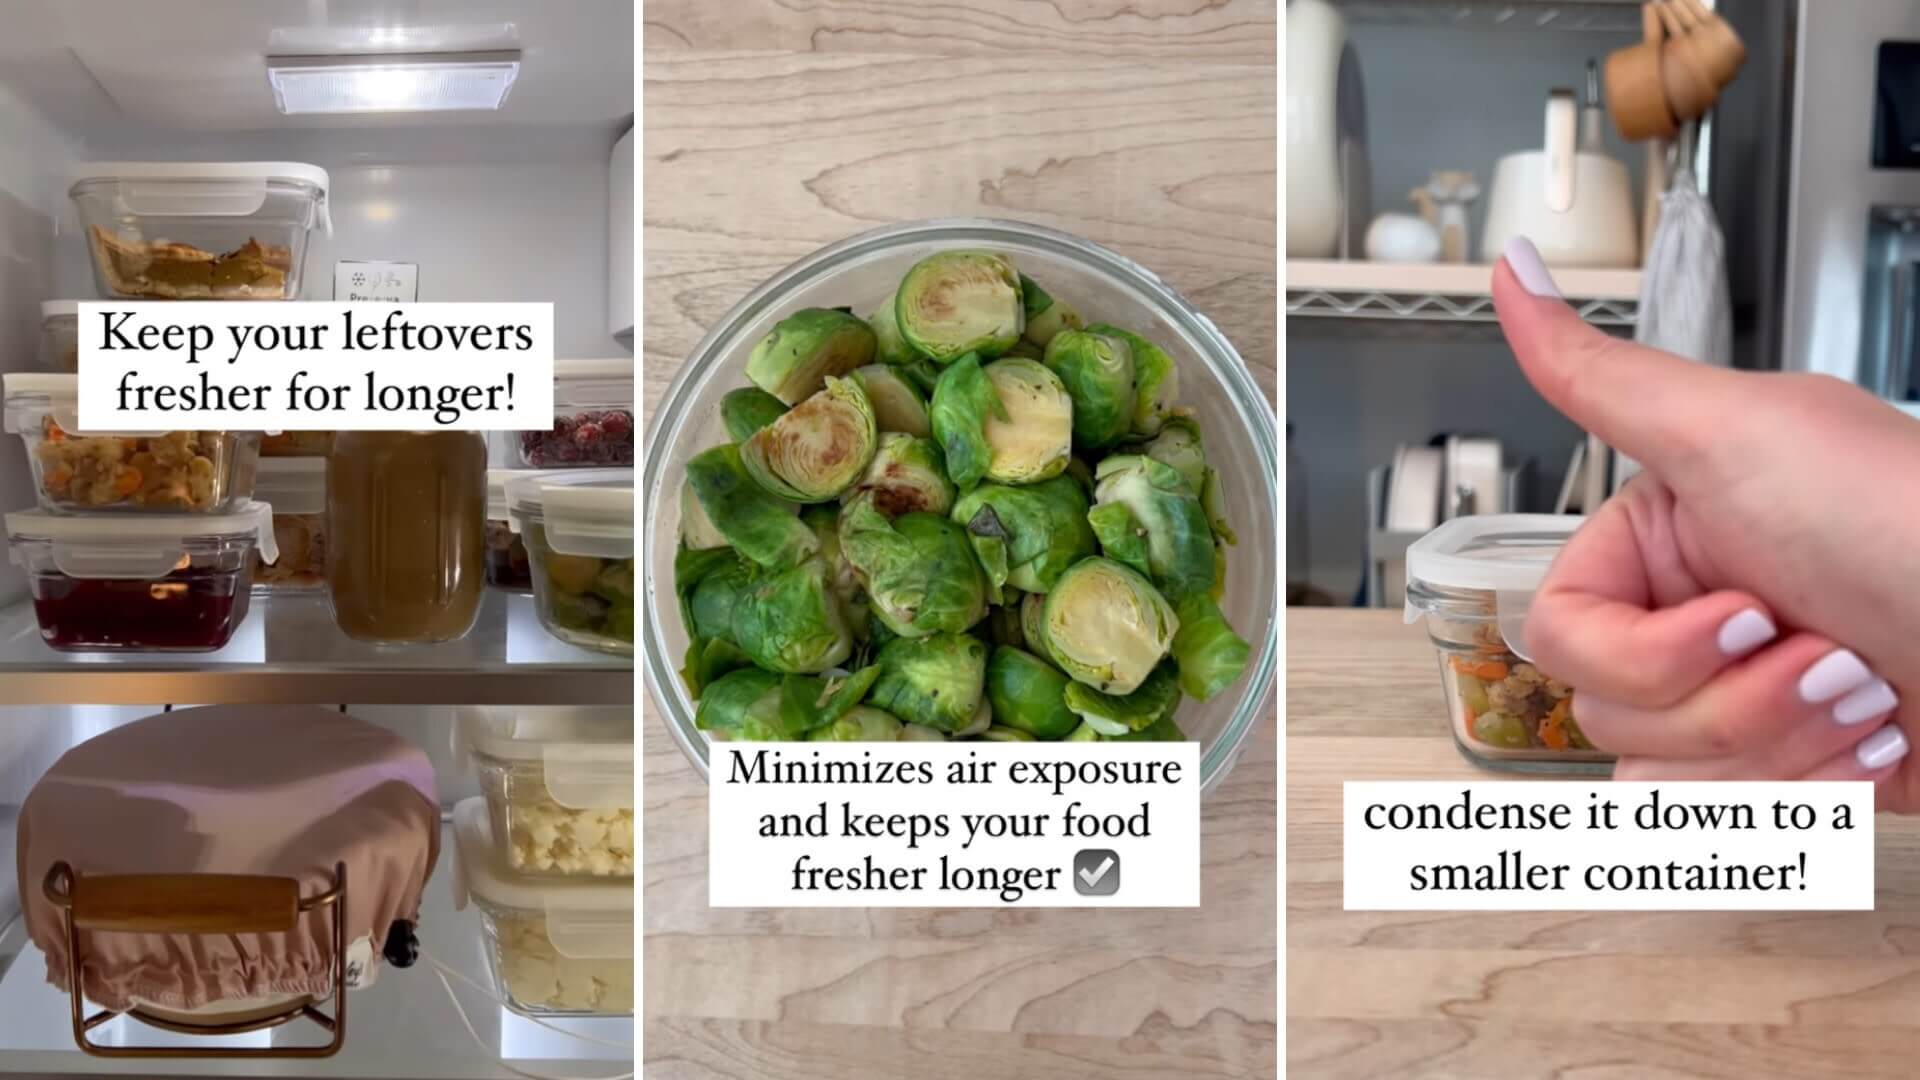 7 viral food hacks that made 2020 easier — at least in the kitchen